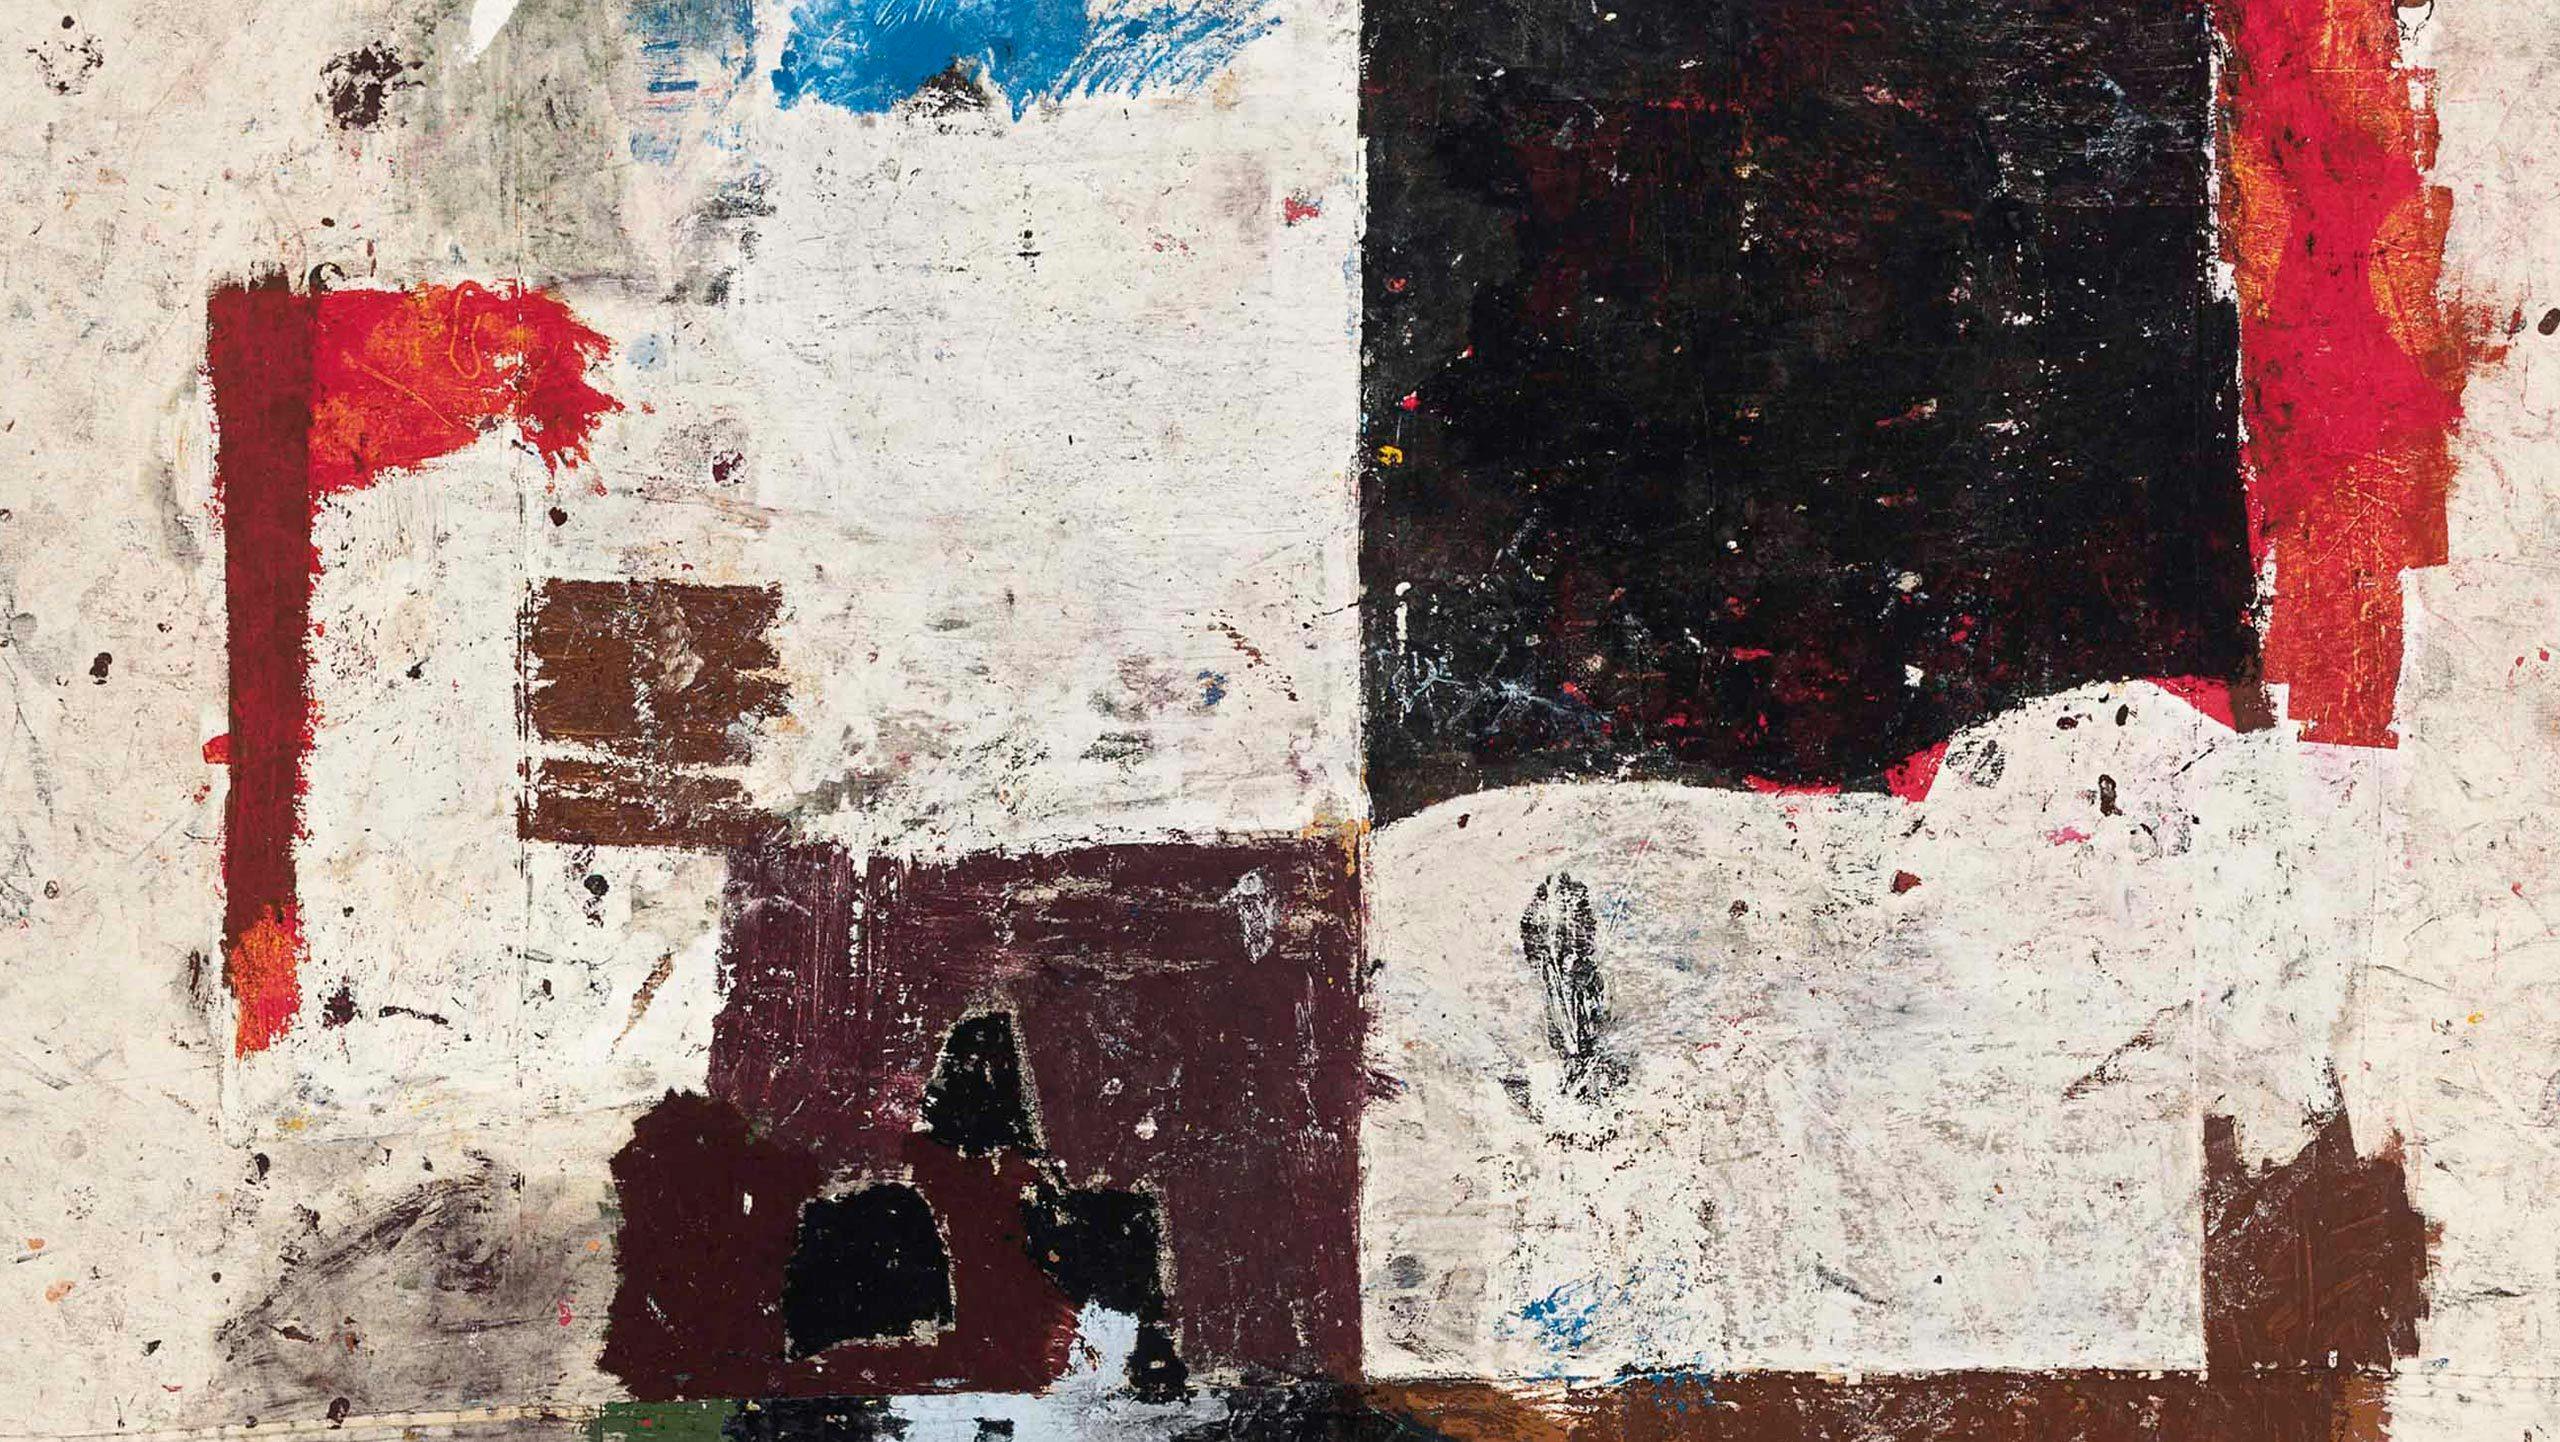 A detail of An untitled painting by Joe Bradley, dated 2012.